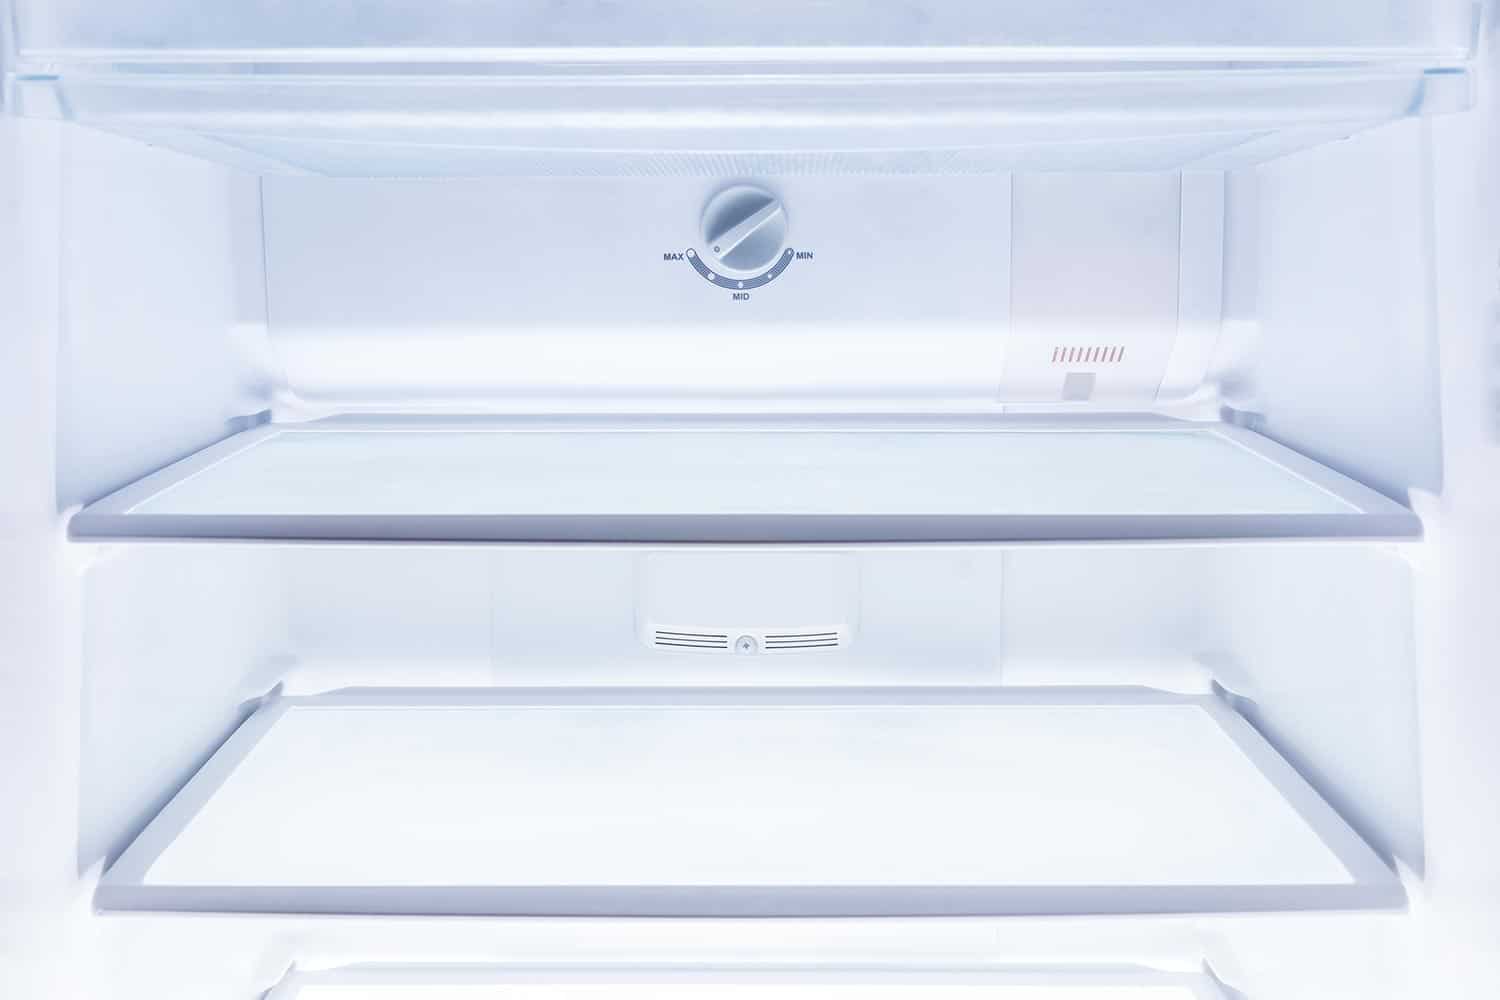 Inside of clean and empty refrigerator with shelves